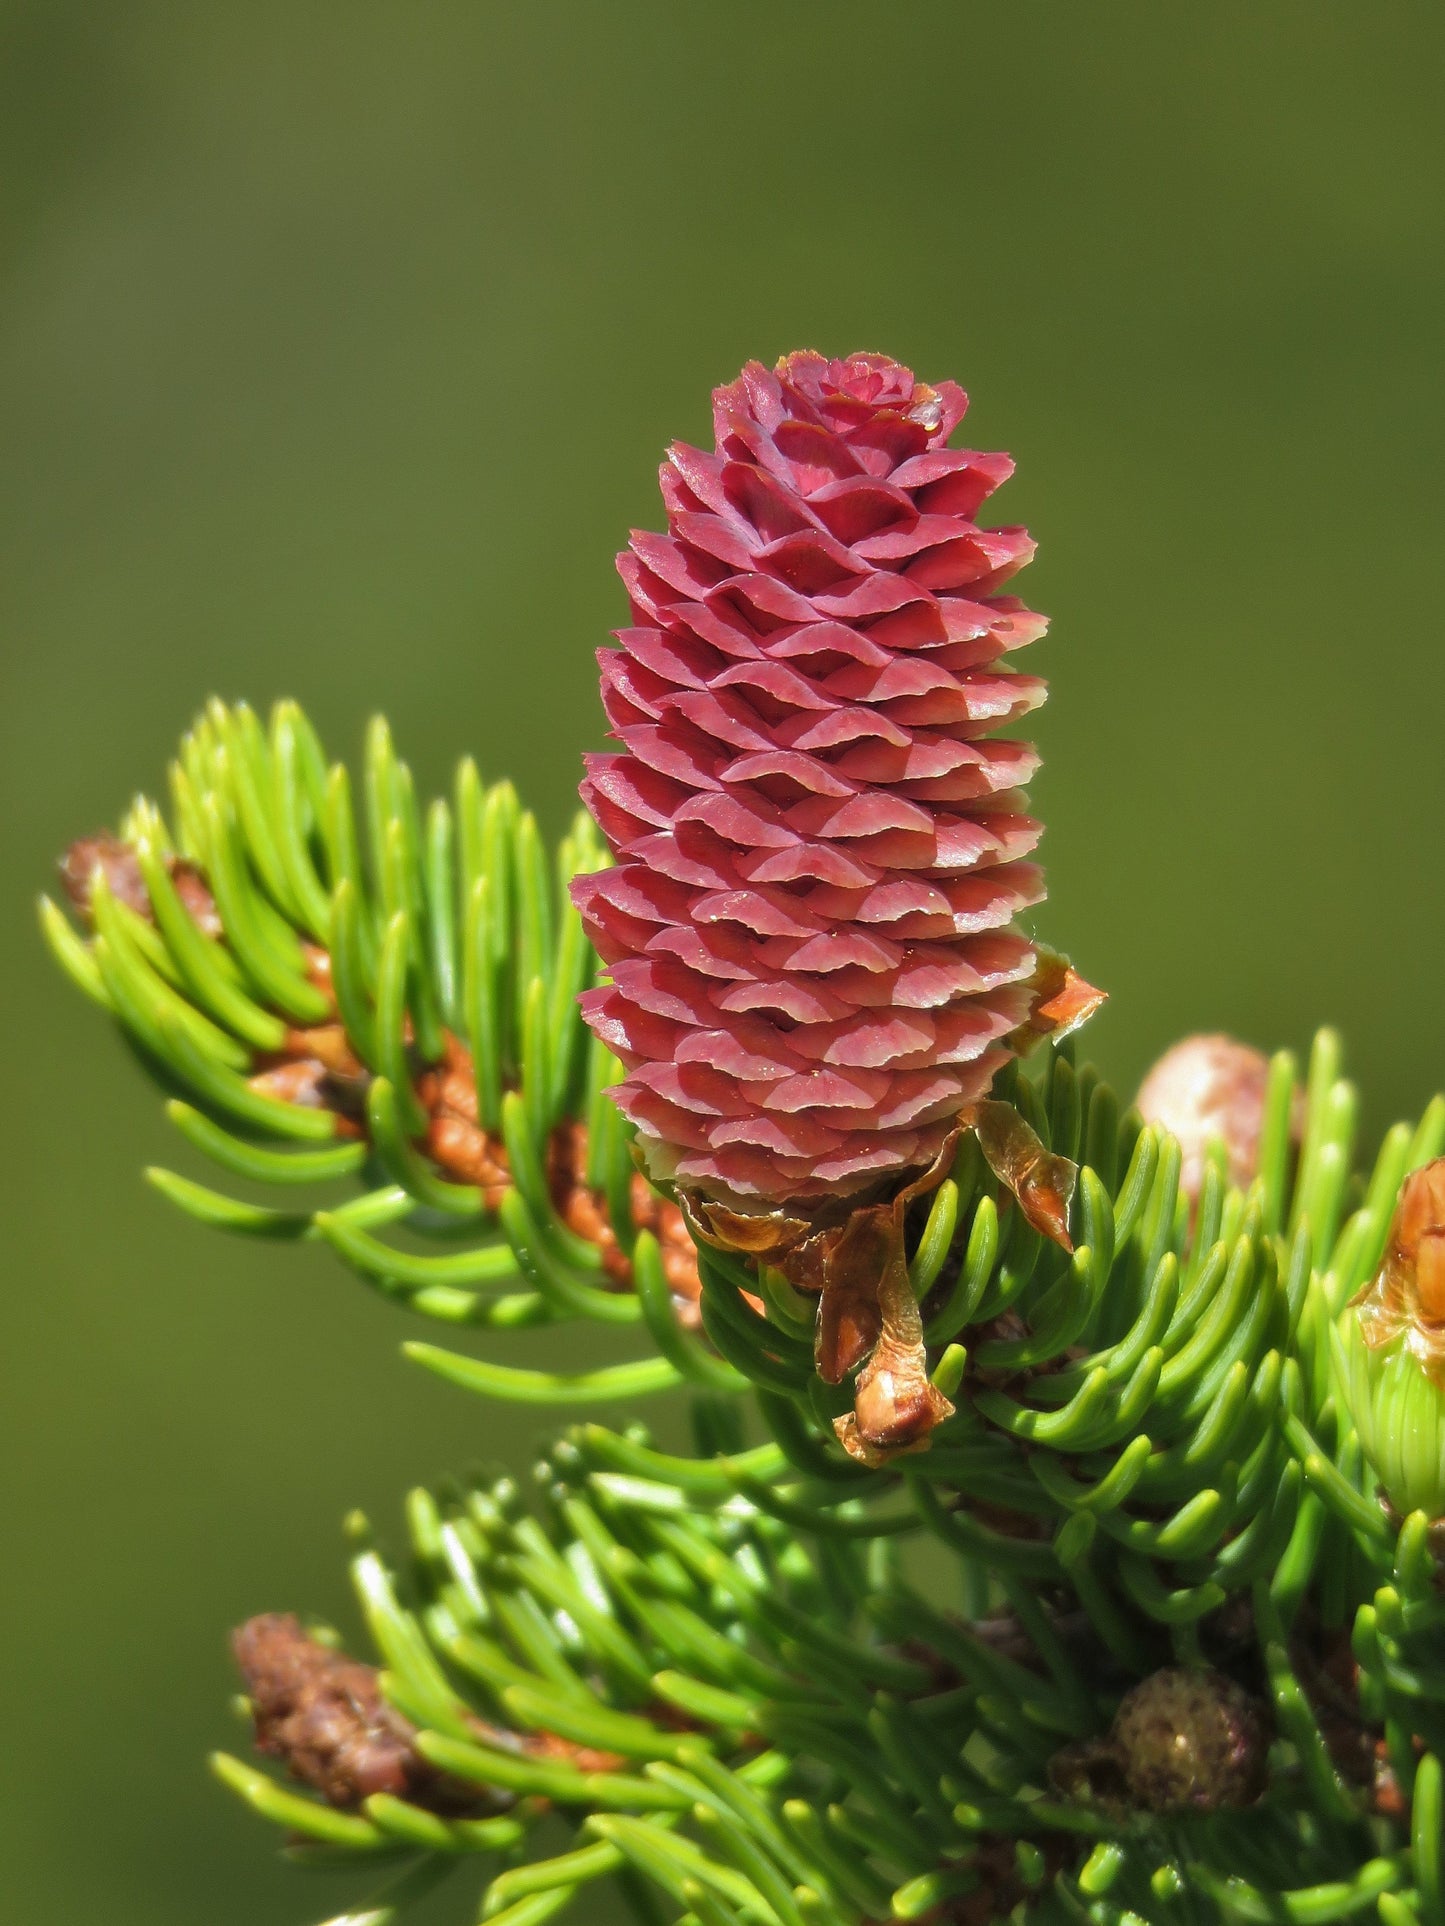 Norway Spruce Picea abies 100 Seeds  USA Company